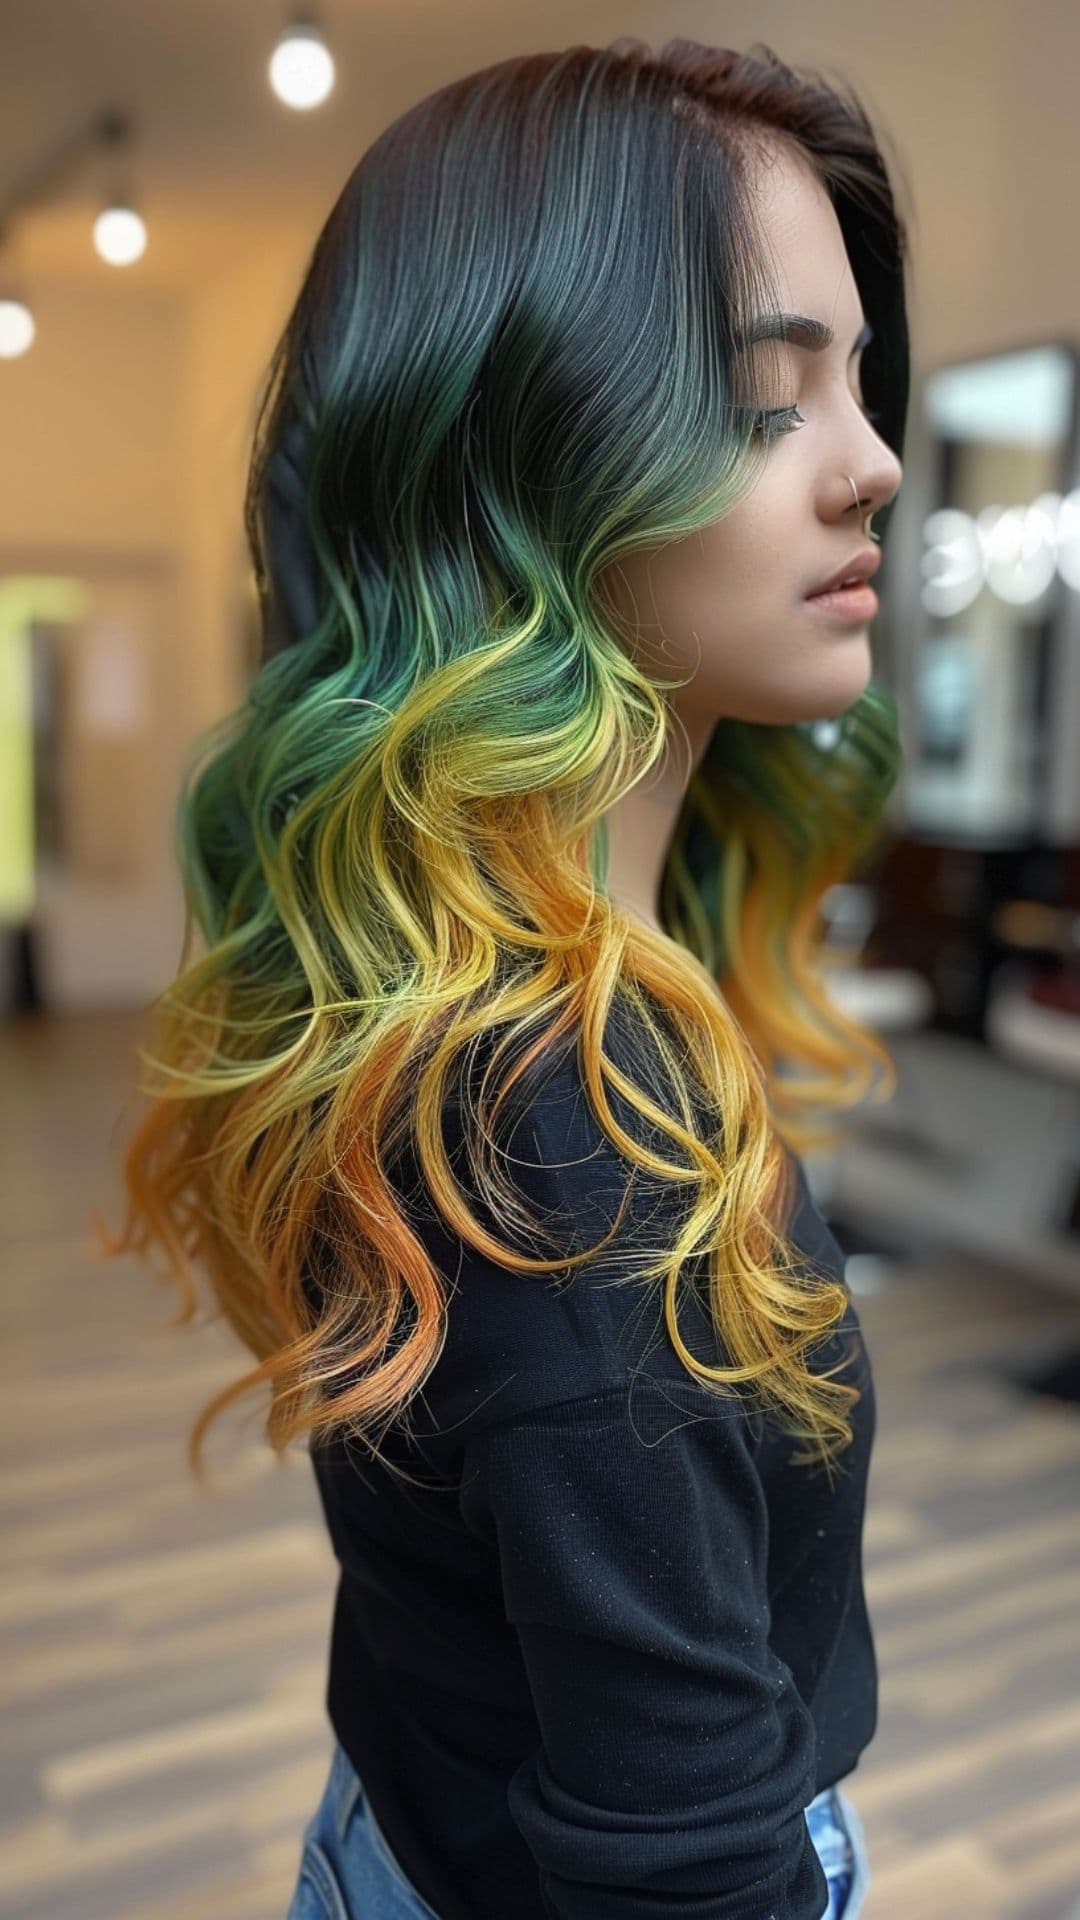 A woman modelling a green, yellow and orange ombre hair.